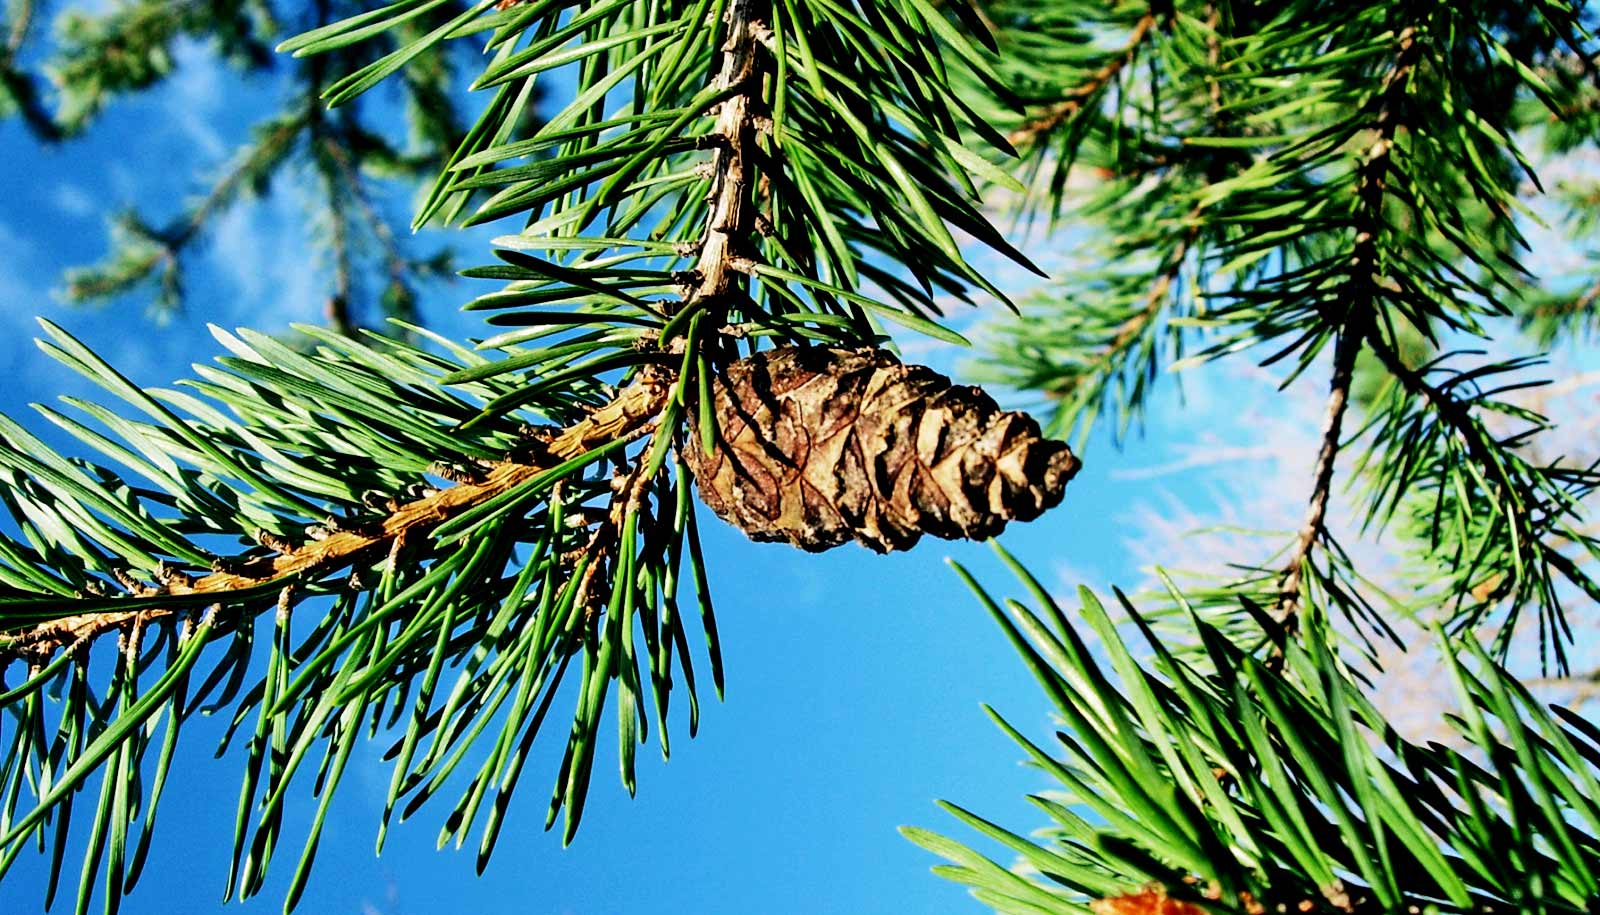 How deep roots may help conifers survive drought - Futurity: Research News